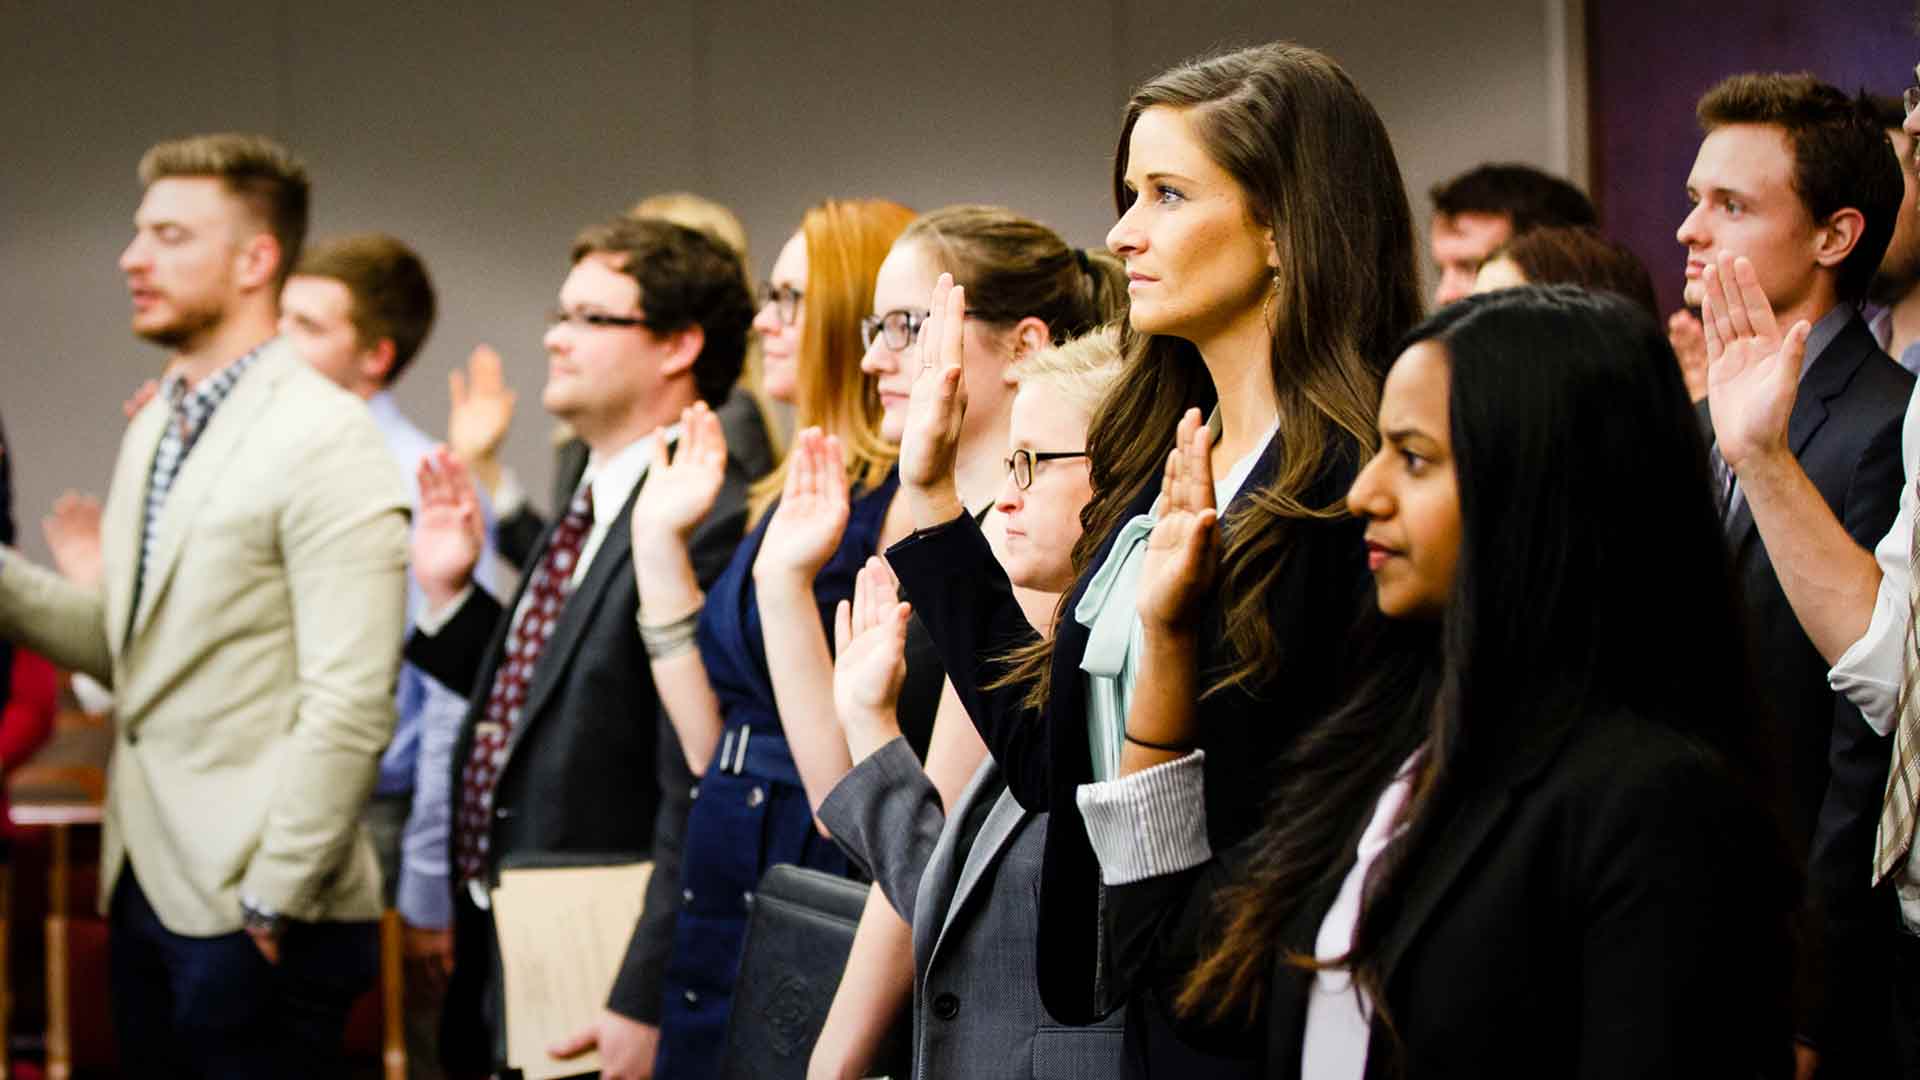 Law students raise their hands in taking an oath.